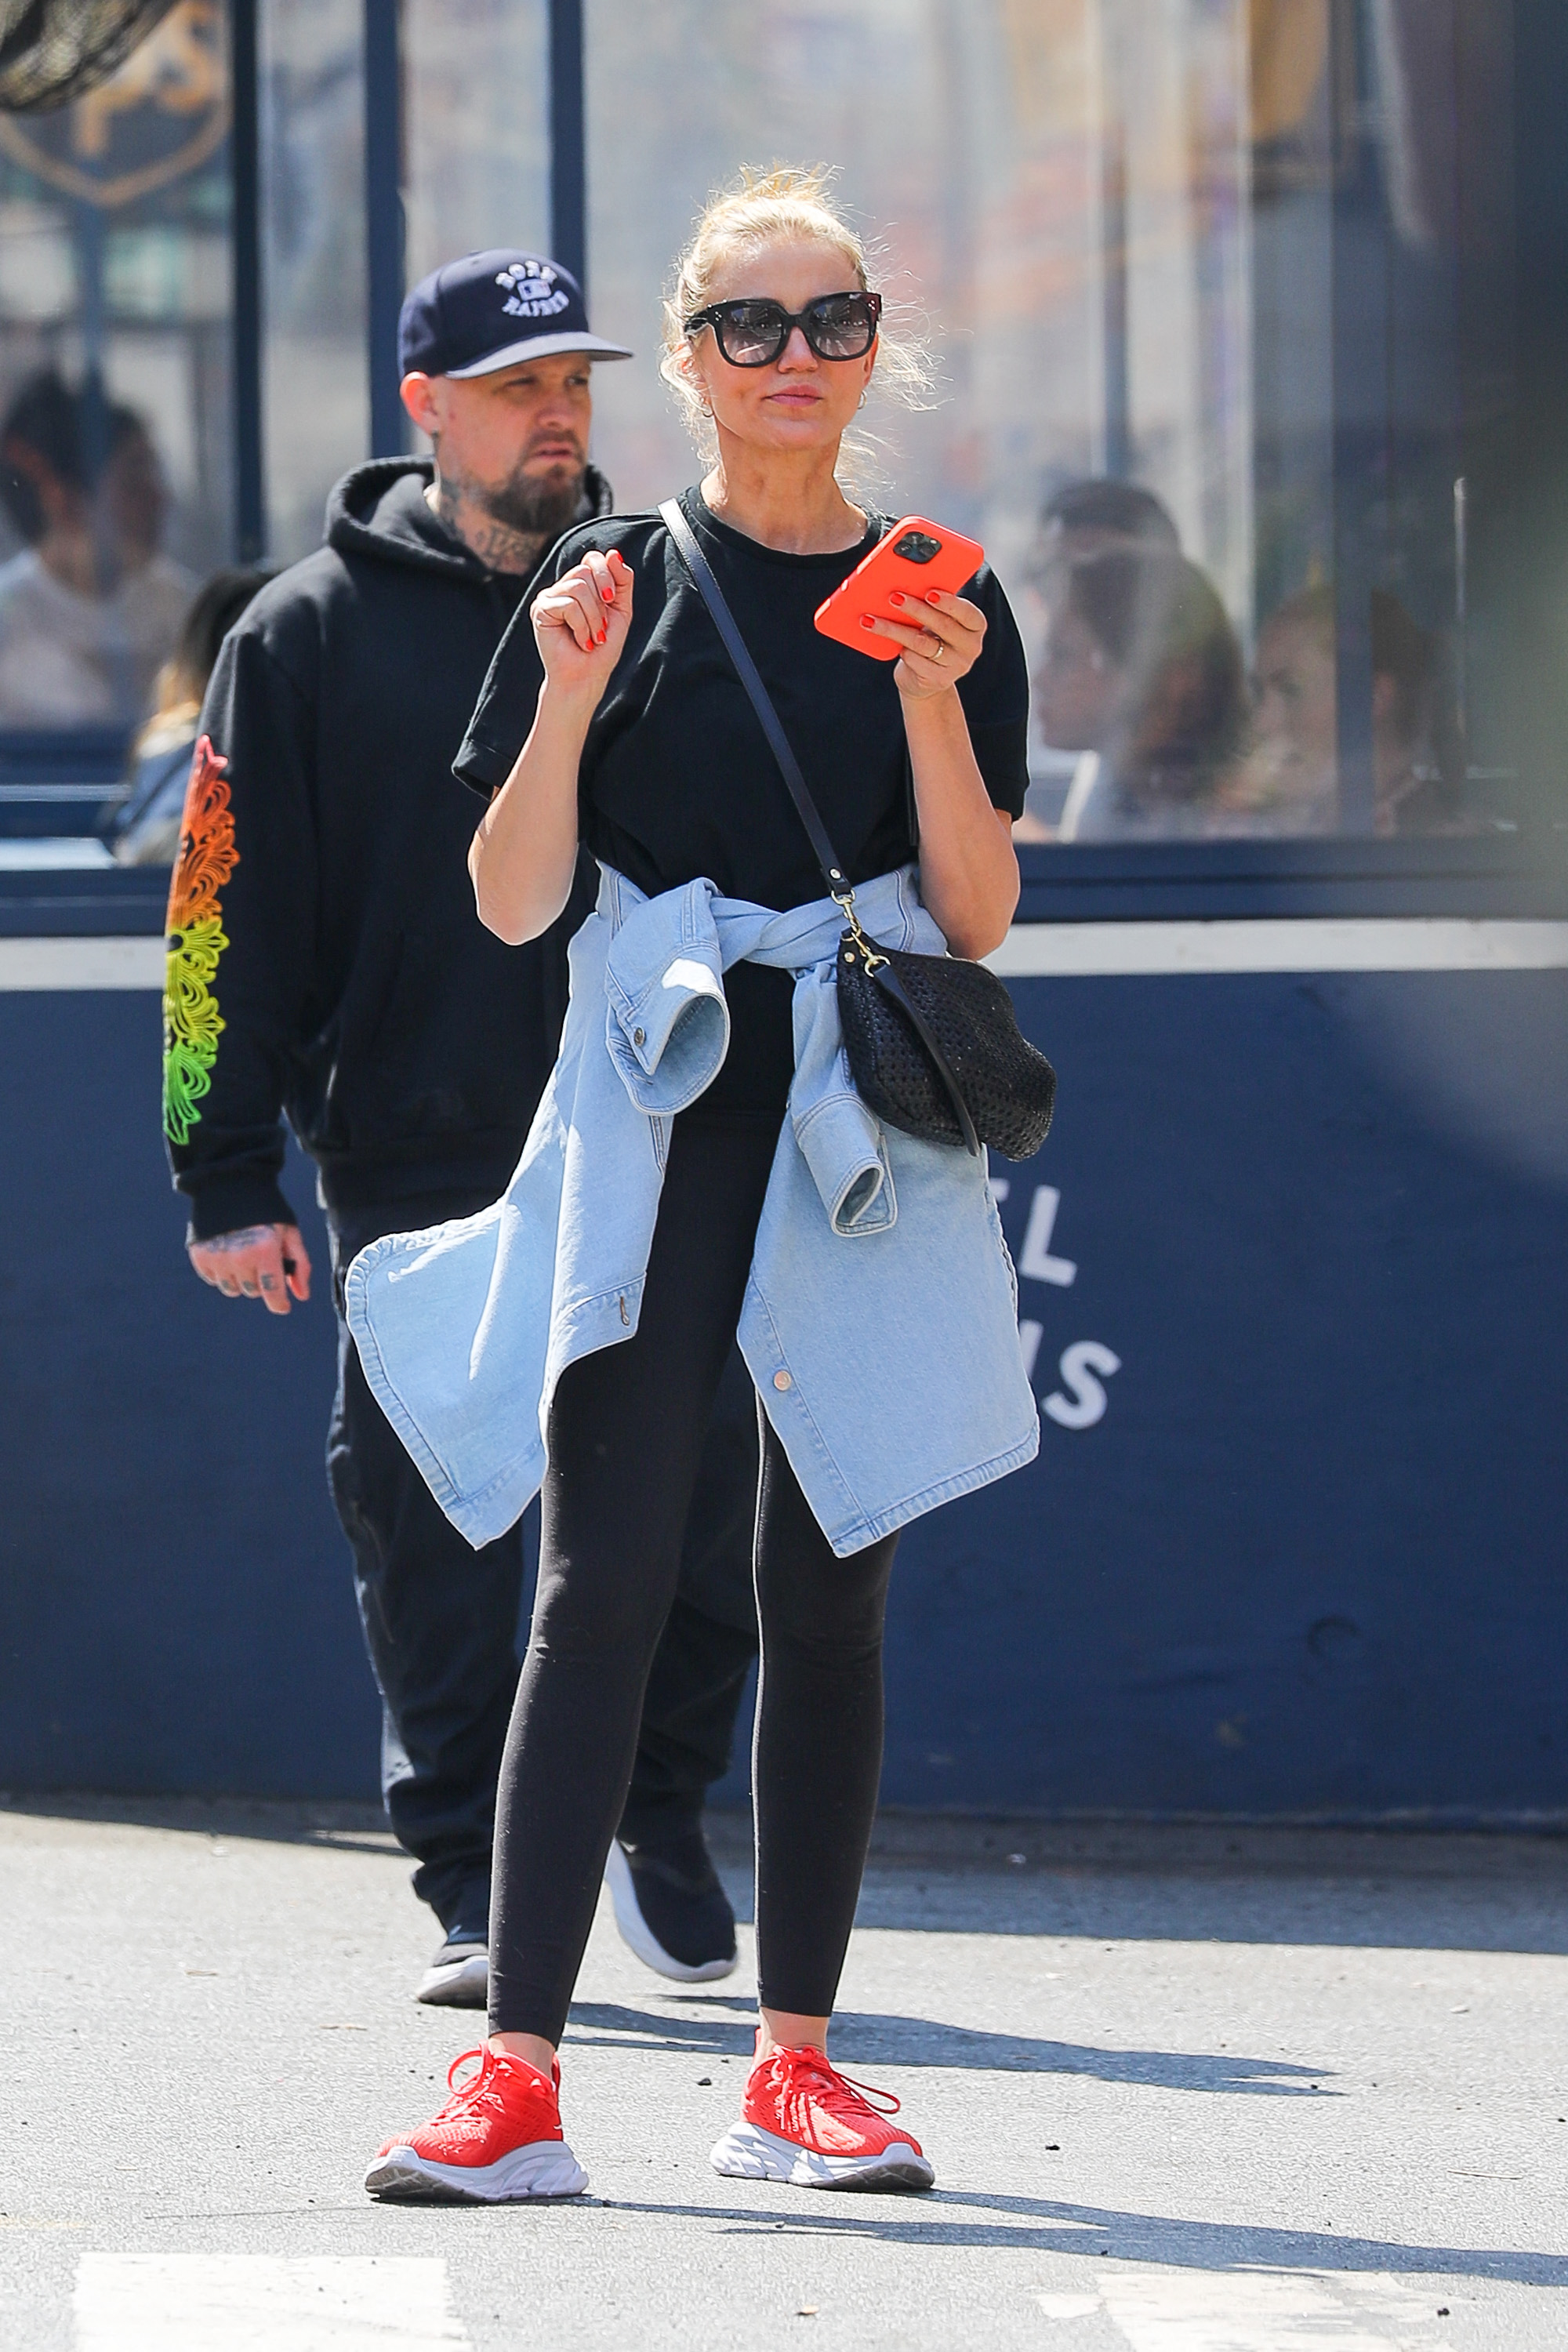 Cameron Diaz and Benji Madden were caught walking the streets of New York in a super sporty look: black tights and sneakers